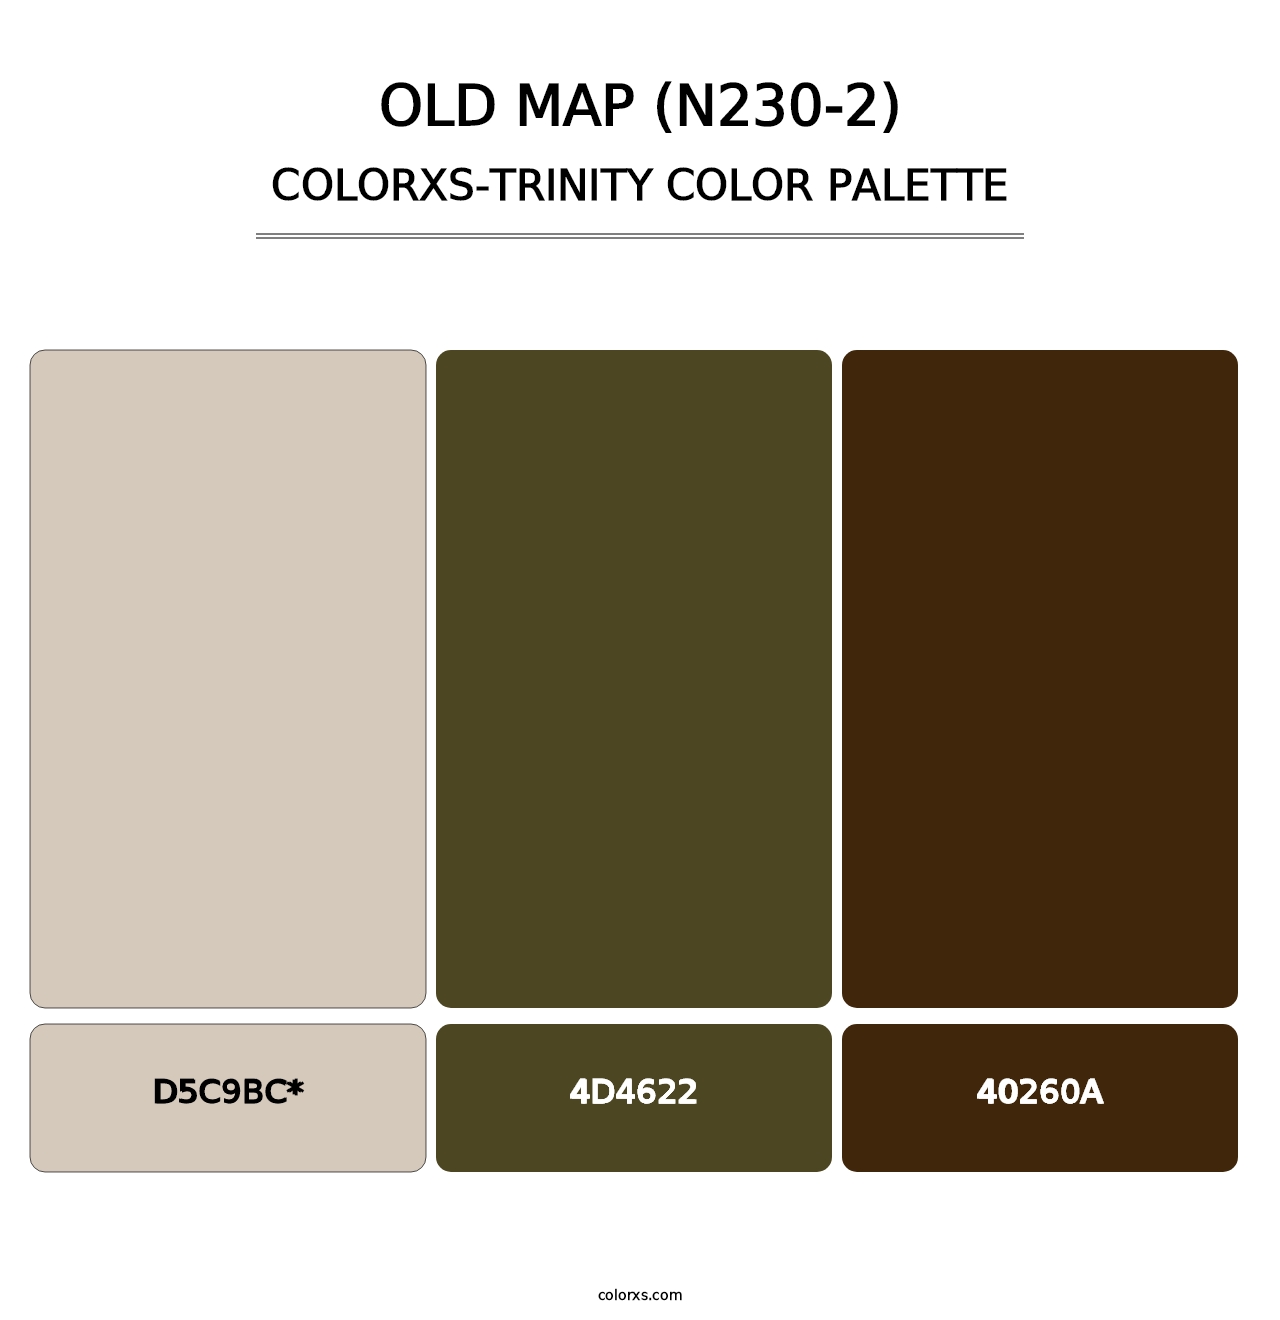 Old Map (N230-2) - Colorxs Trinity Palette